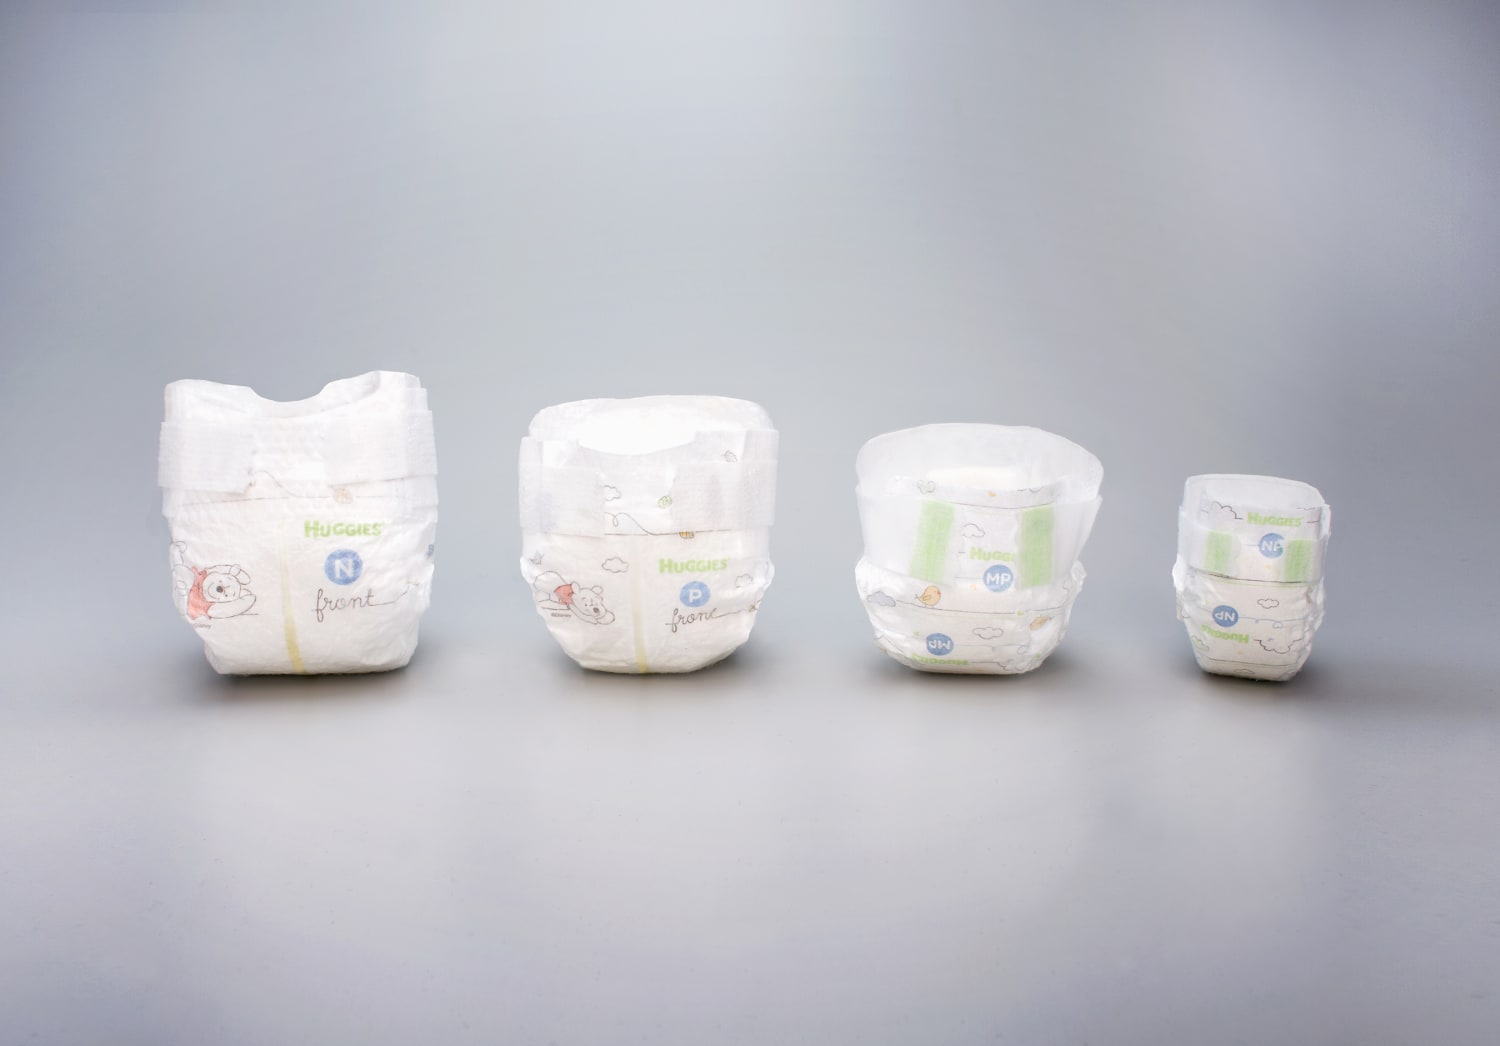 10 Nano micro preemie Diapers Nappies Tiny For Monkeys Or Babies to 1.5 pd🐒